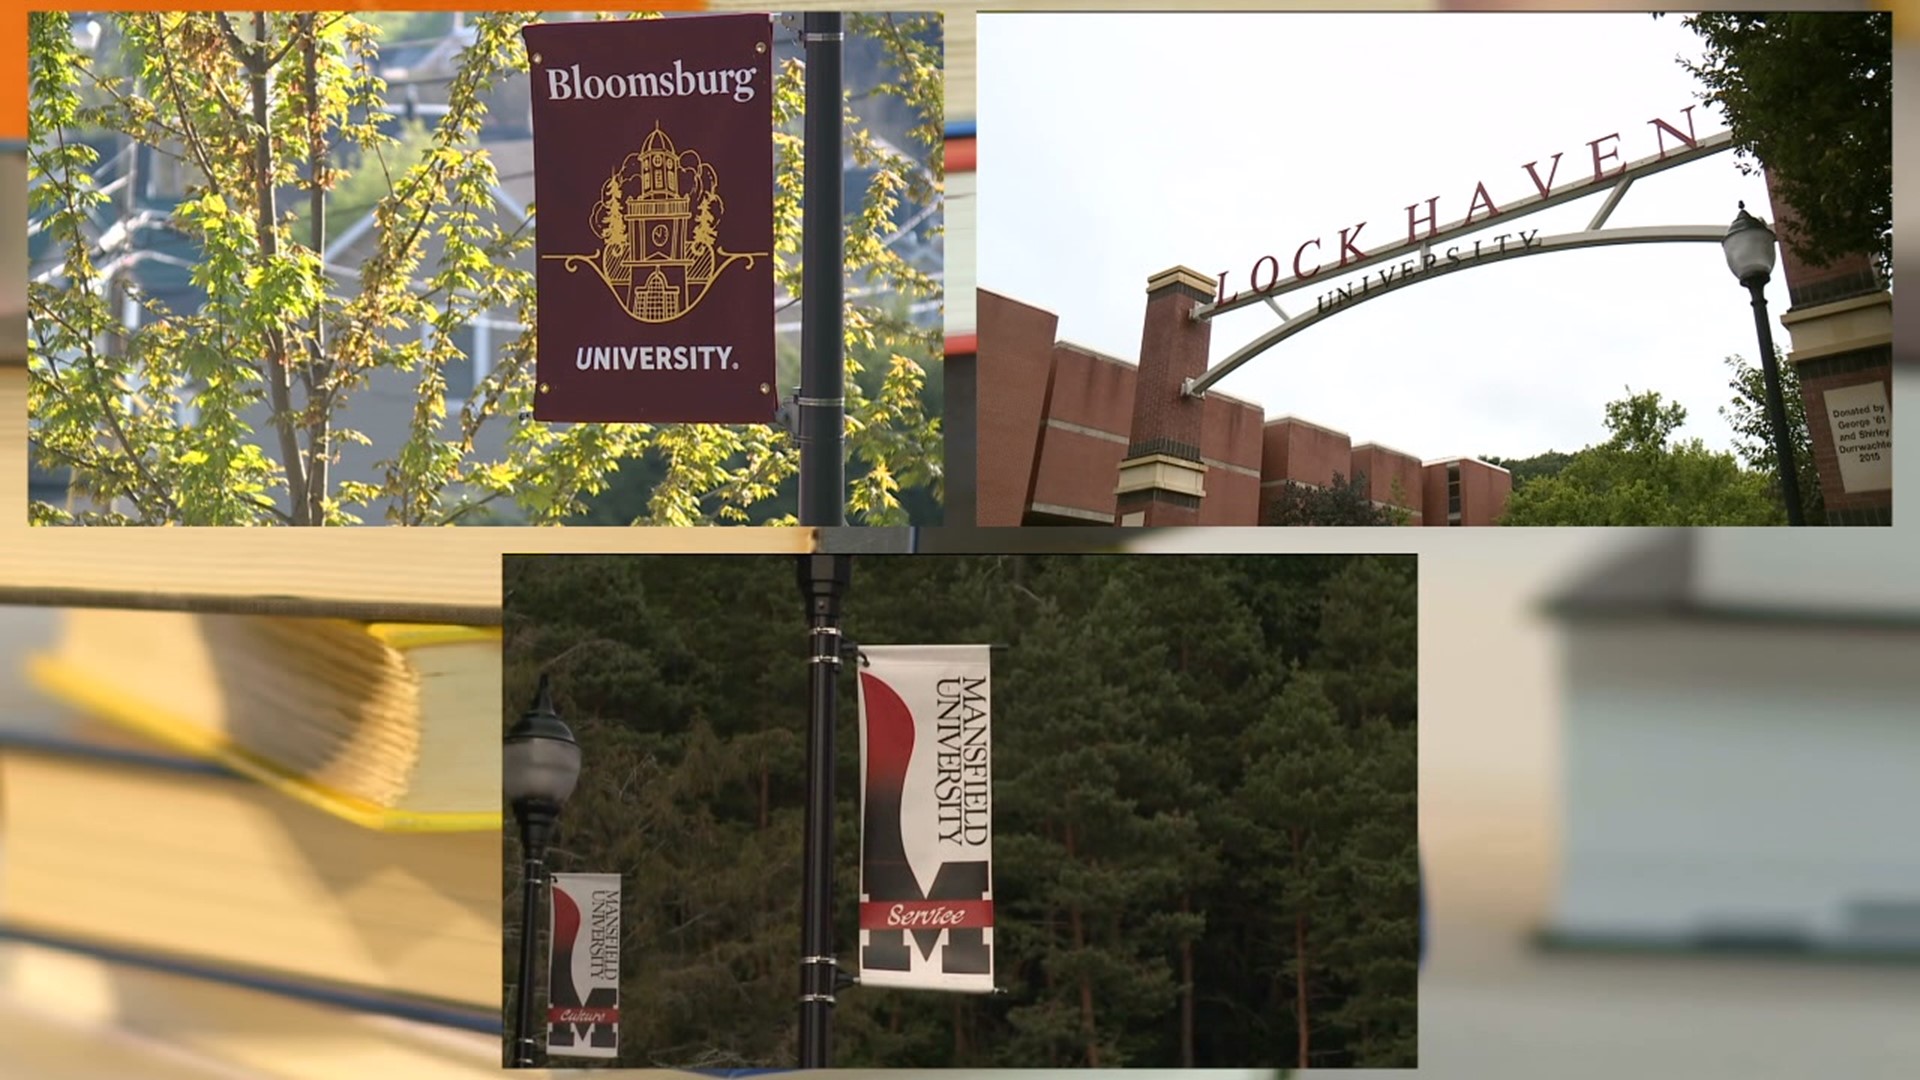 Bloomsburg, Lock Haven, and Mansfield will still form a single university with unified leadership as planned by the state.